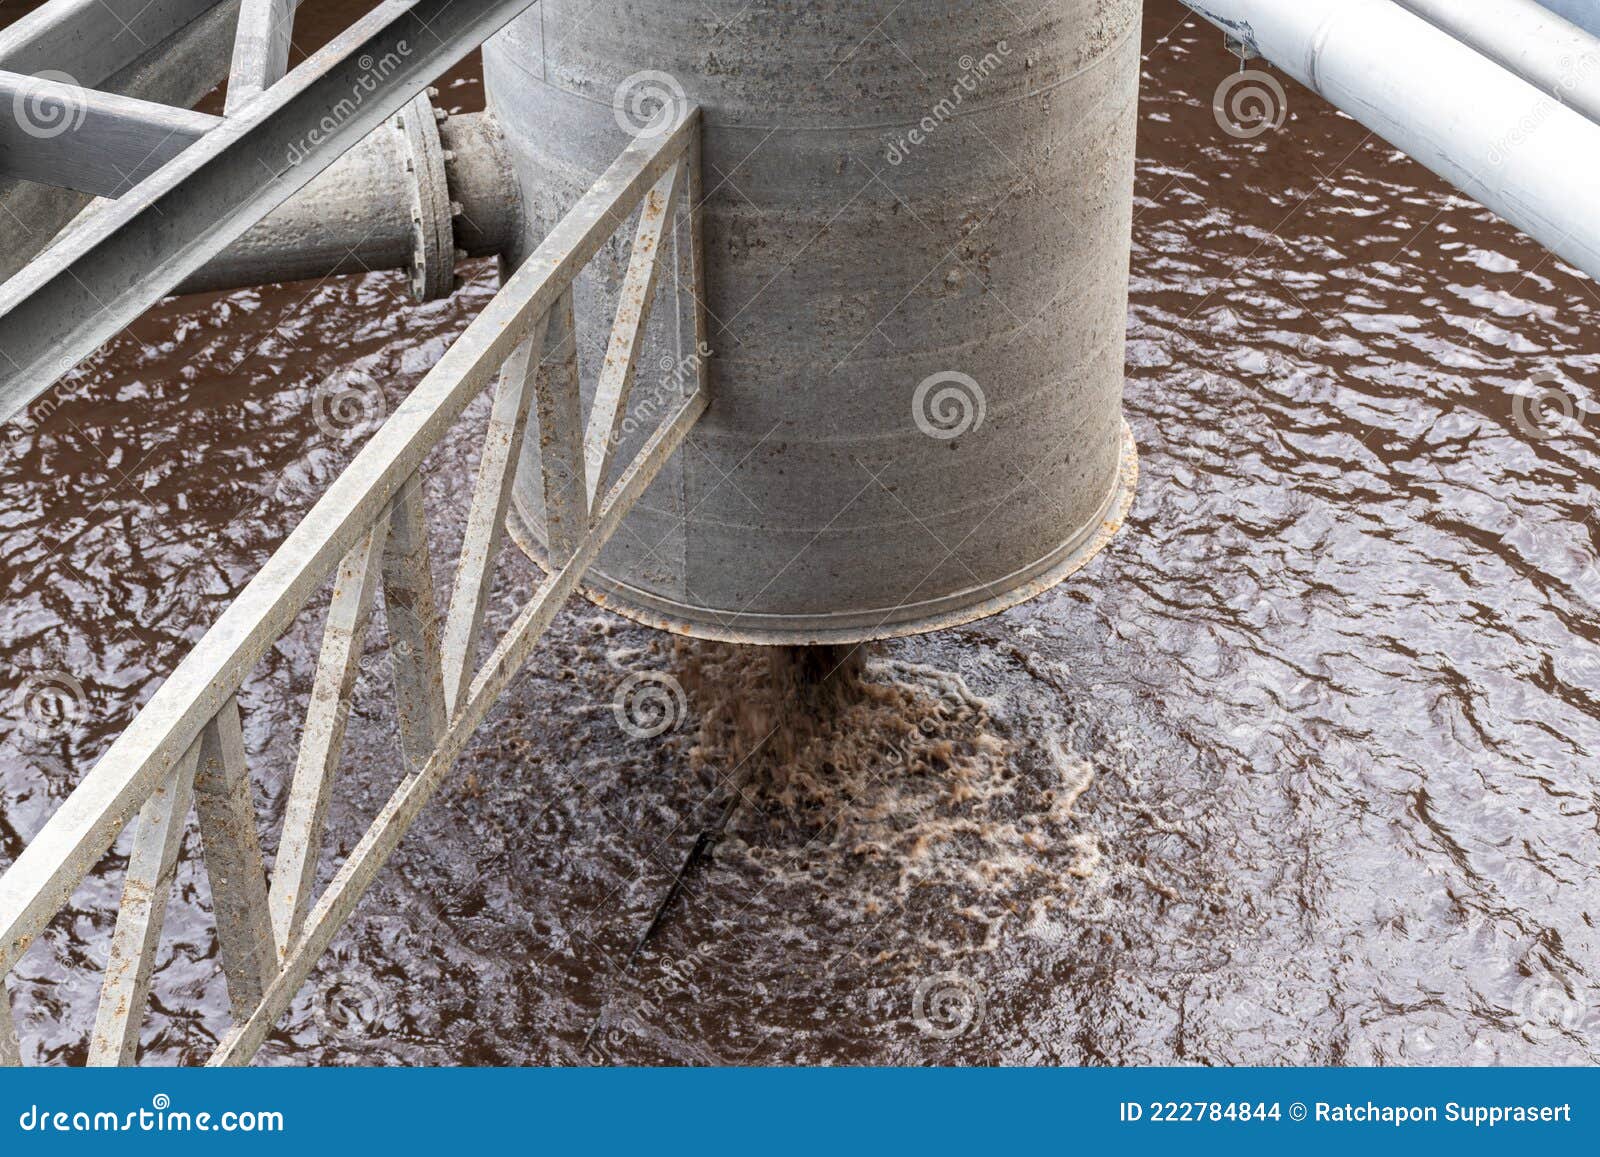 Waste Water Treatment Ponds from Industrial Plants Stock Photo - Image ...